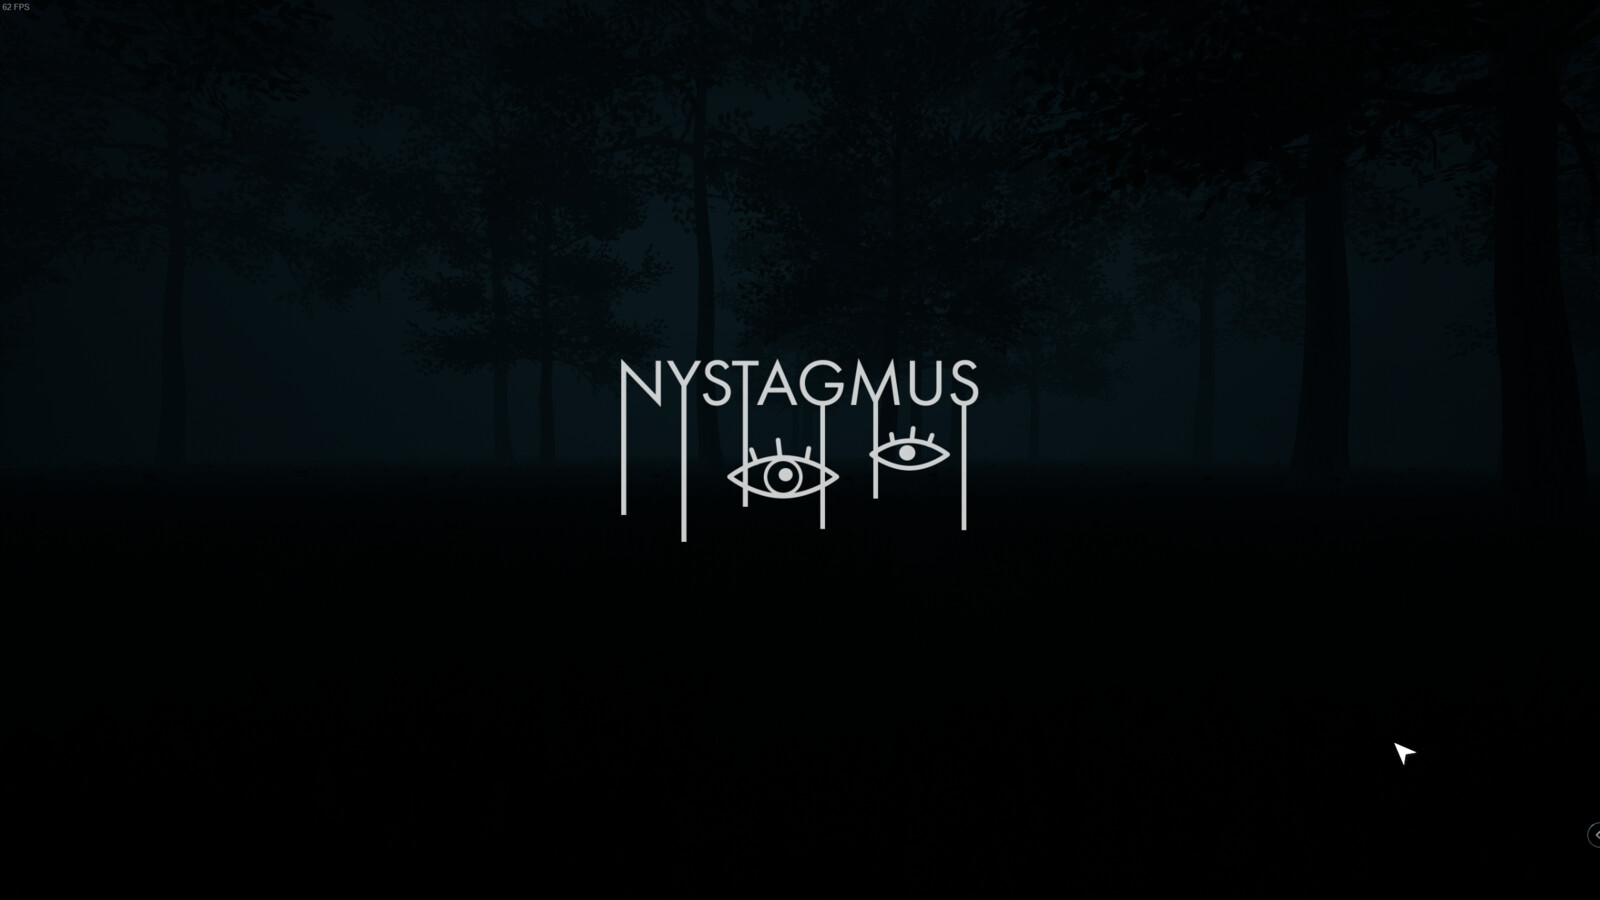 Nystagmus Video game project